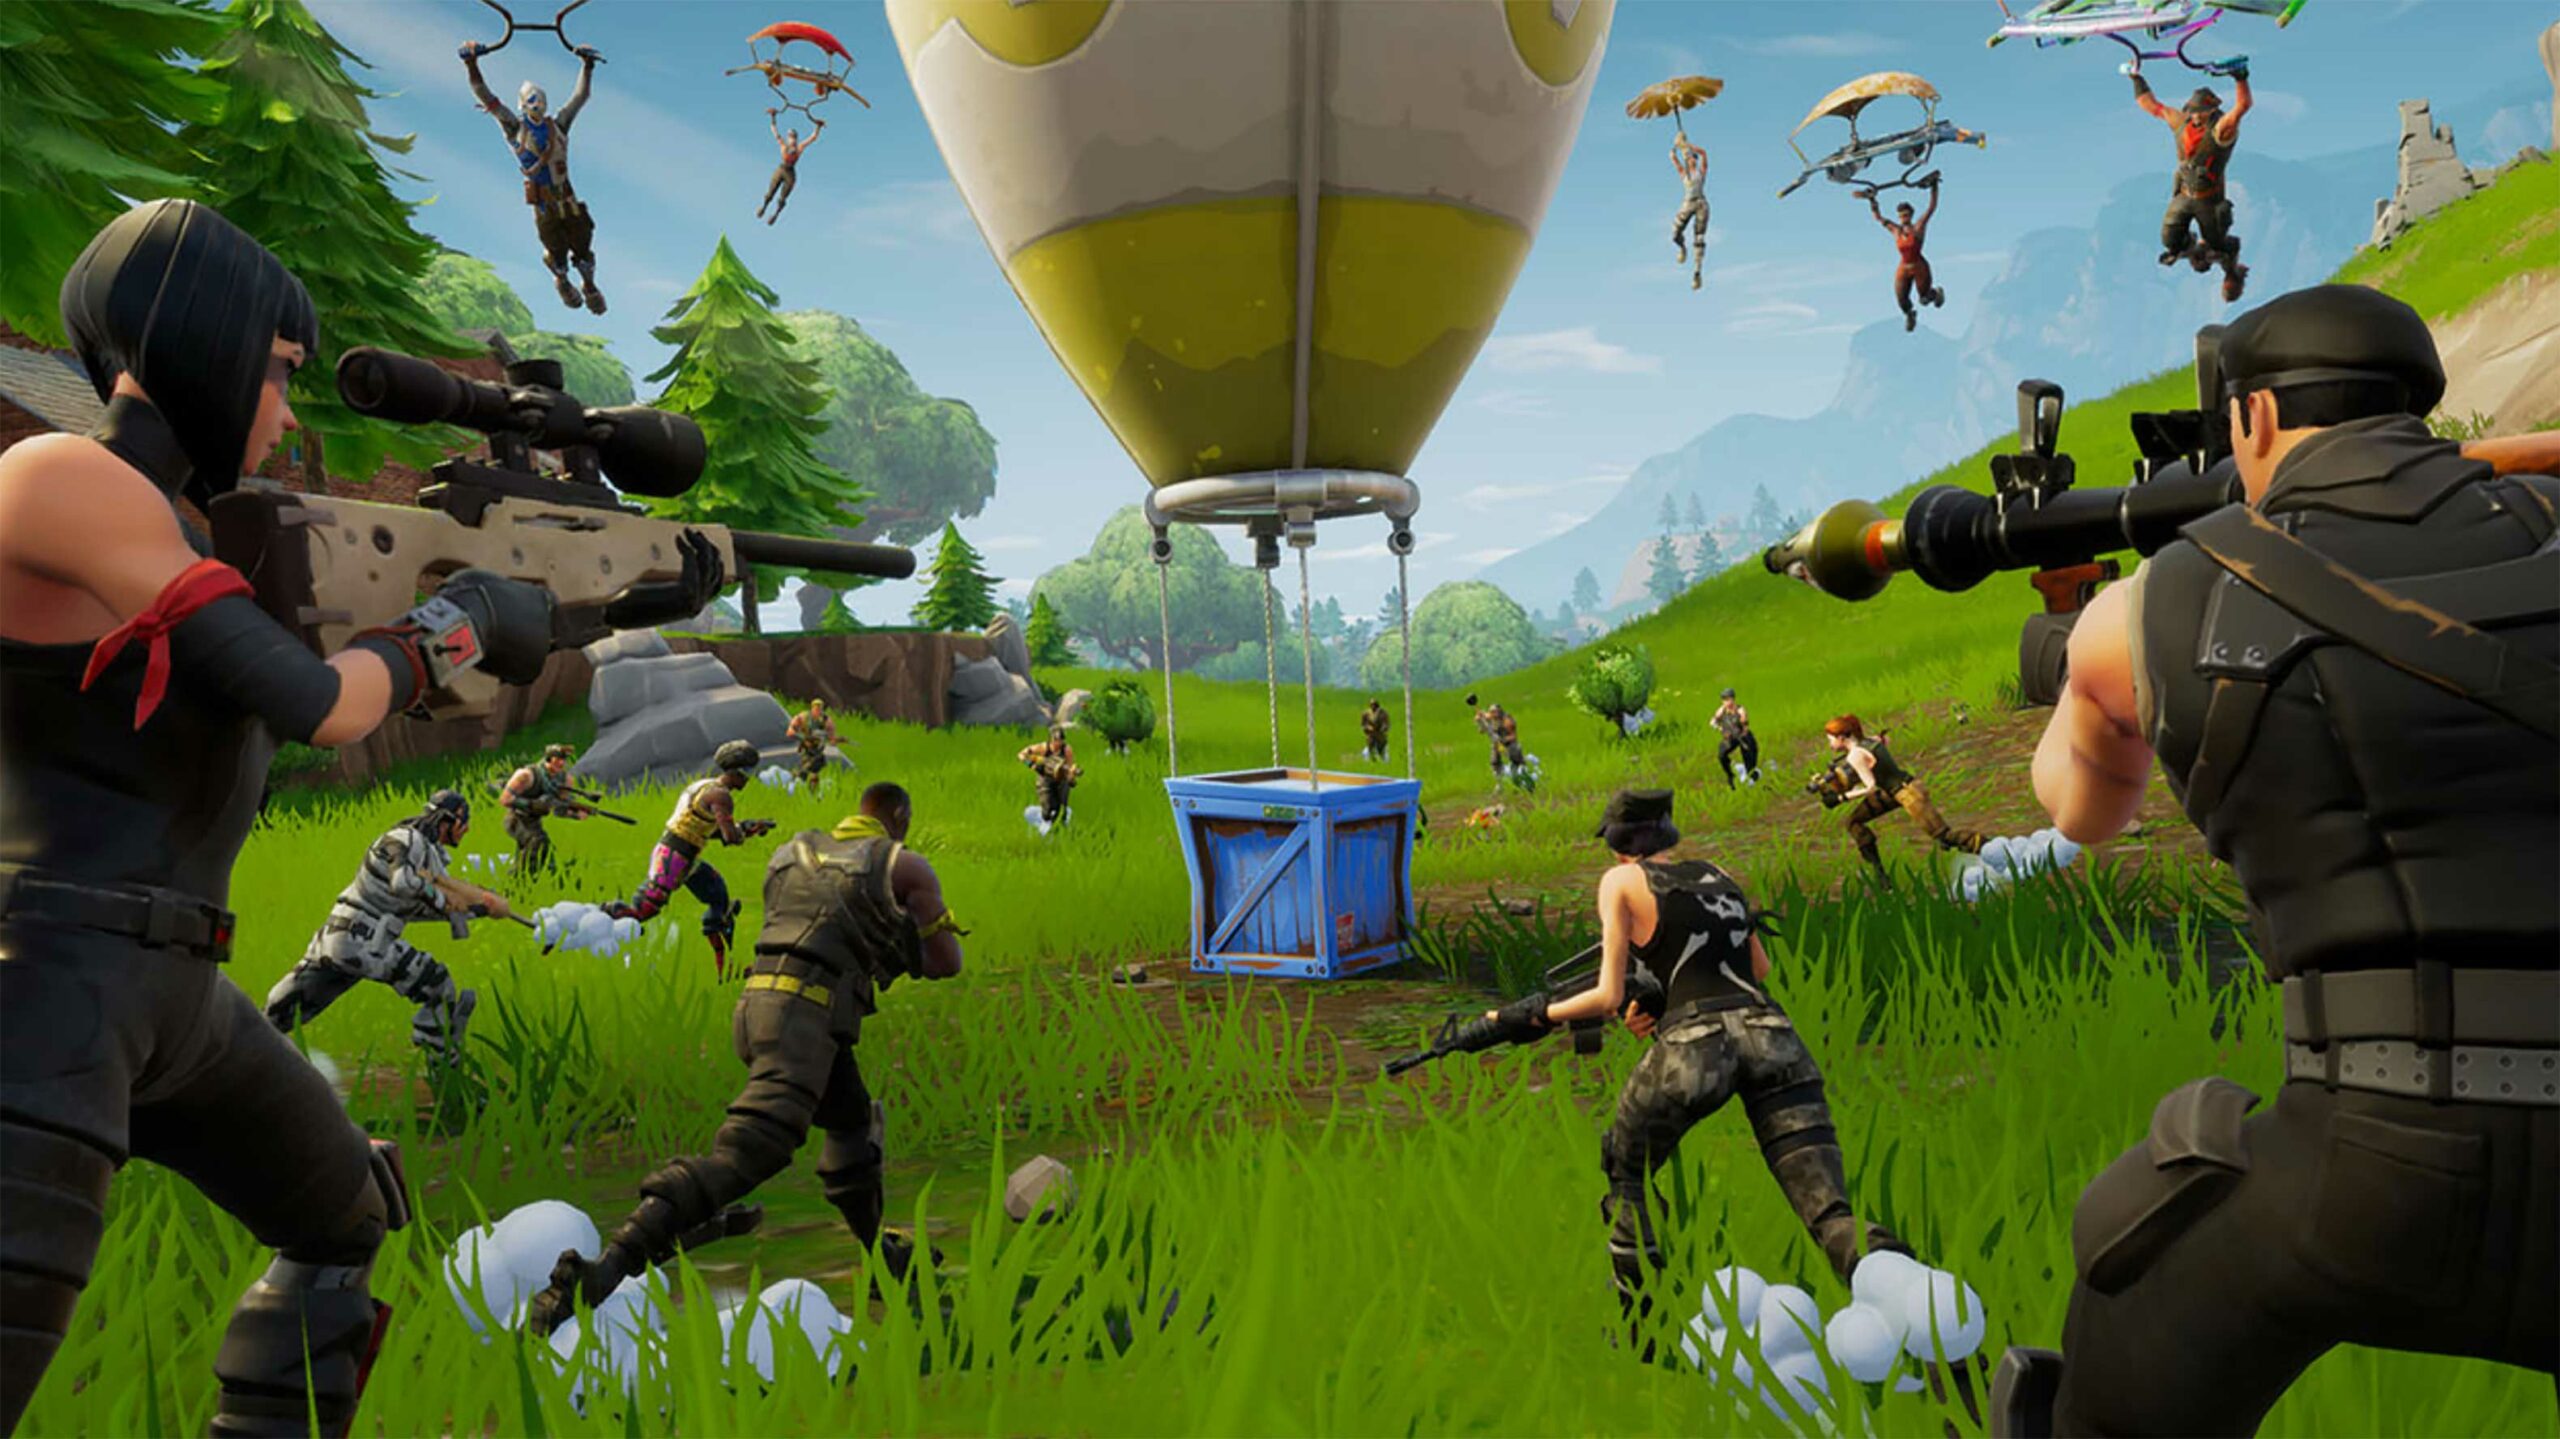 Fortnite Free on iPhone Through Xbox Cloud Gaming - GameRevolution